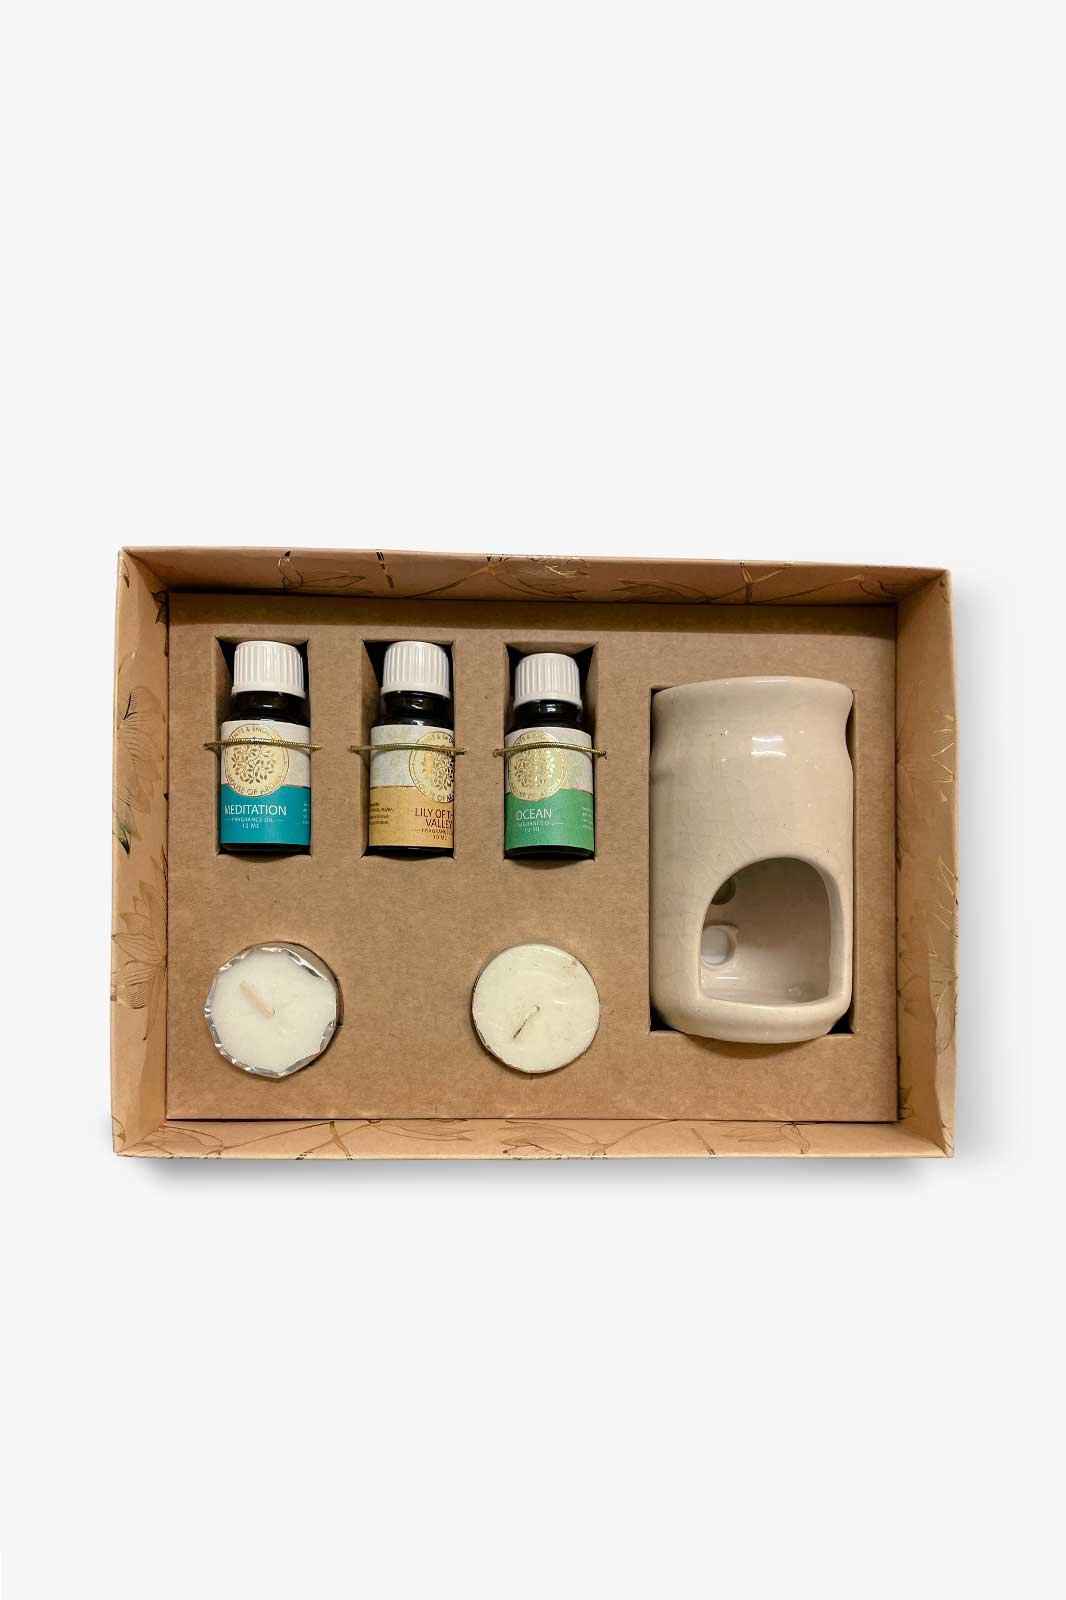 diffuser gift set, aroma diffuser near me, aroma gift set, aroma diffuser shop near me, aroma diffuser gift set, reed diffuser gift set, scent diffuser gift set, home diffuser gift set, diffuser with oils gift set, reed diffuser gift box wholesale, diffuser gift set next, essential oils for diffuser gift set, top fragrance companies in india, fragrance oil for diffuser, , fragrance oil for reed diffuser, fragrance oil for water diffuser, House of aroma, fragrance oil, fragrance oils, fragrance oils for candles, fragrance oils for soap, fragrance oil for perfume, fragrance oil lavender, fragrance oil on skin, fragrance oil uses, fragrance oil manufacturers, fragrance oil for incense sticks, fragrance oil online, fragrance oil air freshener, fragrance oil benefits, premium fragrance oil brand, top fragrance brands in the world, premium fragrance oil for candles, premium quality fragrance oils, best fragrance brand in the world, top 10 luxury fragrance brands, fragrance oil brands, top fragrance companies in india, fragrance brands in india, fragrance oil suppliers in india, best fragrance oil brands for candles, best aroma oil brands in india, best fragrance oil brands, world's best fragrance brands, aroma oil brands, fragrance oil brands in india, top fragrance oil brands, brands of fragrance oil, fragrance oil for diffuser, fragrance oil for reed diffuser, fragrance oil for mist diffuser, fragrance oil for electric diffuser, aroma oil or essential oil, fragrance oil for water diffuser, fragrance oil or essential oil for wax melts, fragrance oil diffuser set, fragrant oil for diffuser